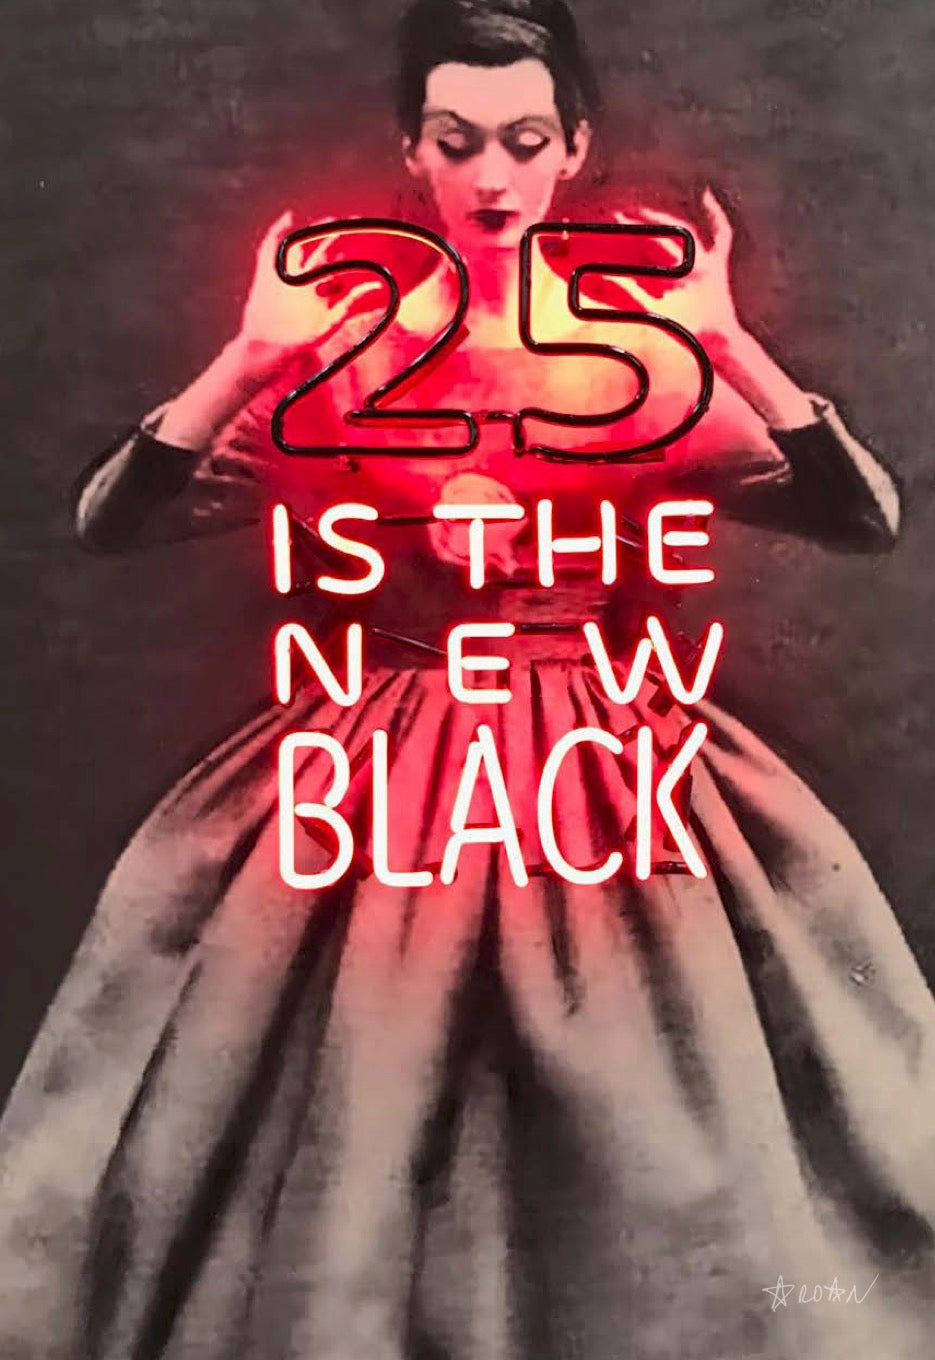 25 Is The New Black